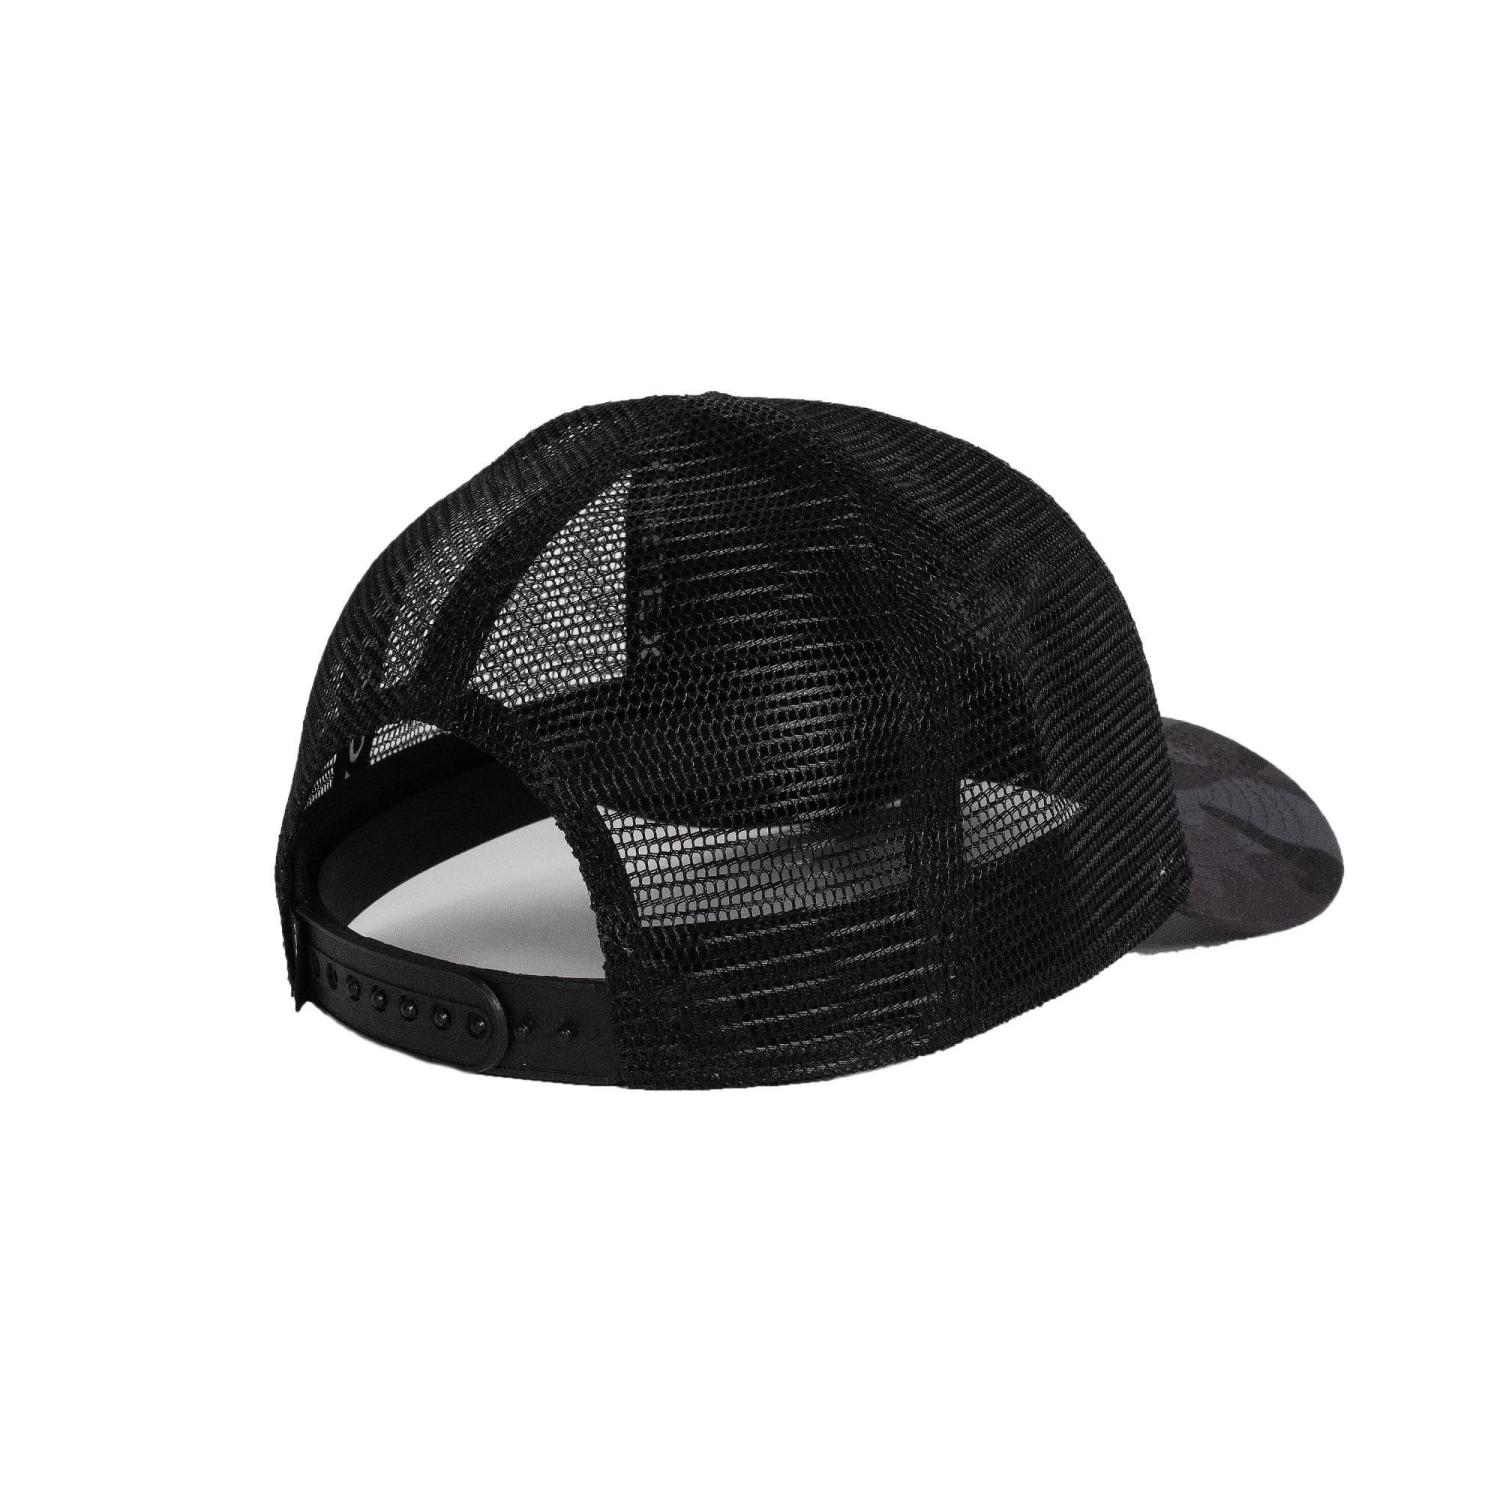 Receive A Vortex Logo Hat (Black Camo) For Free With Coupon Code ...